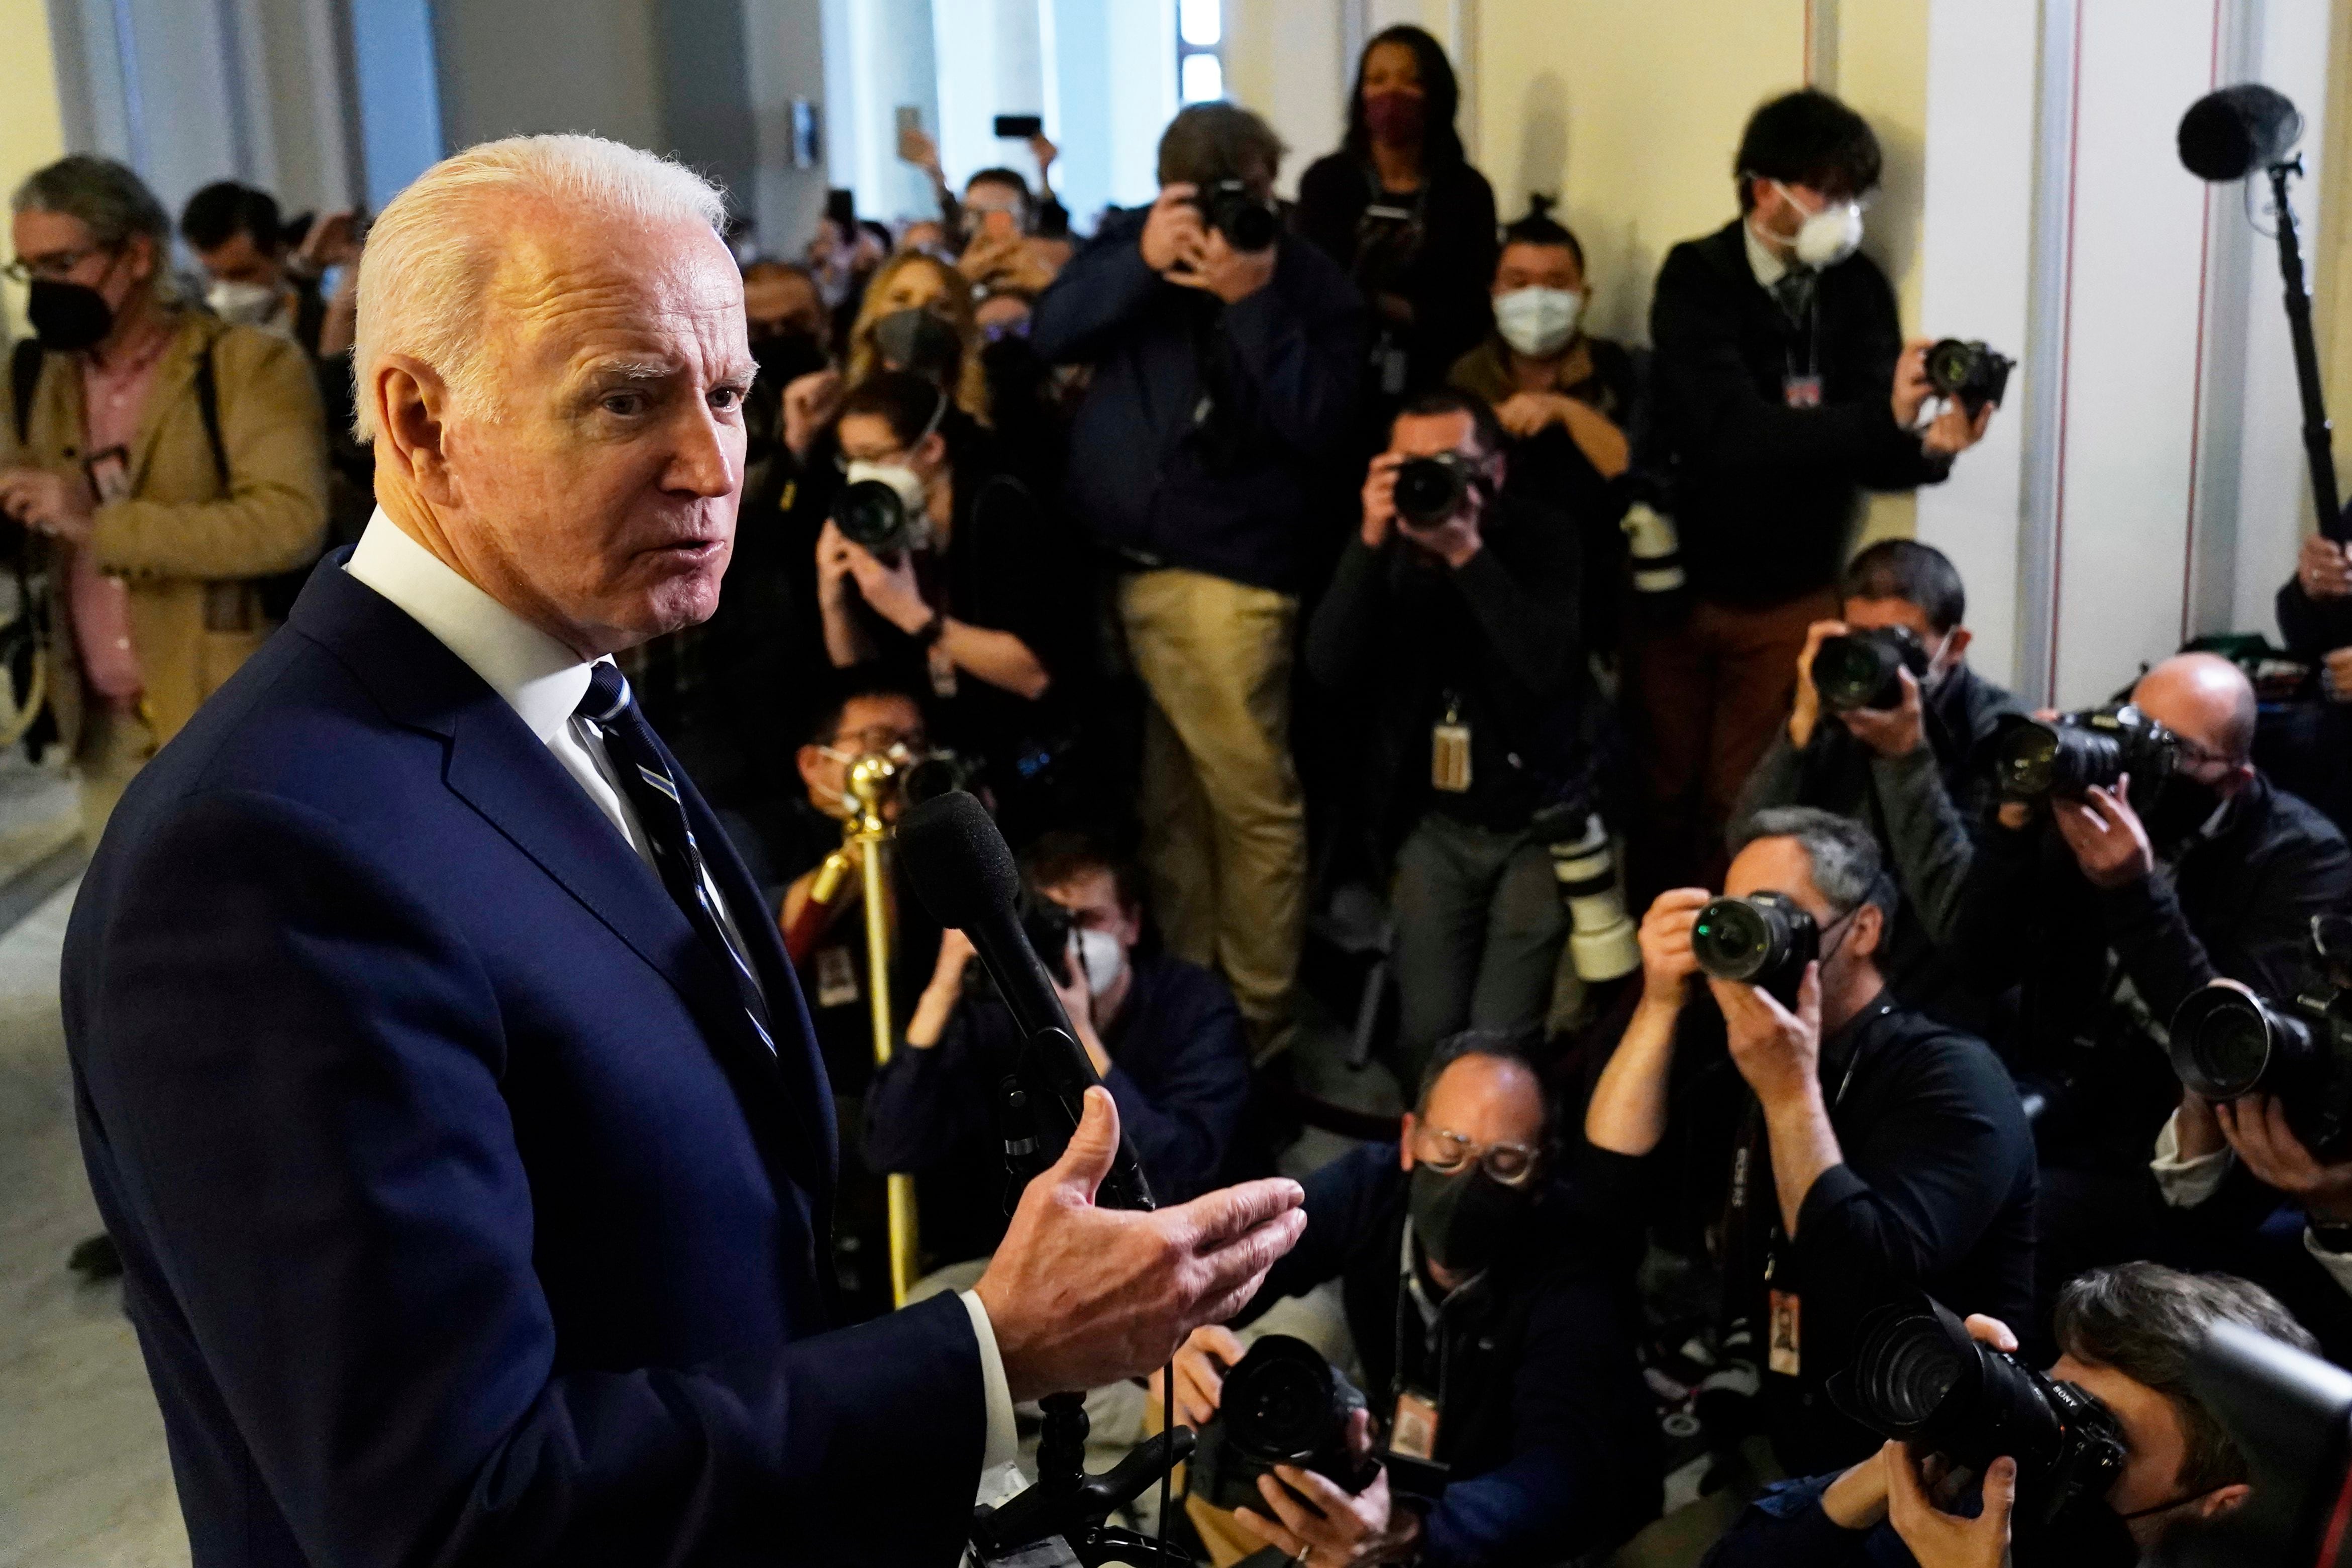 Biden to hold news conference next Wednesday